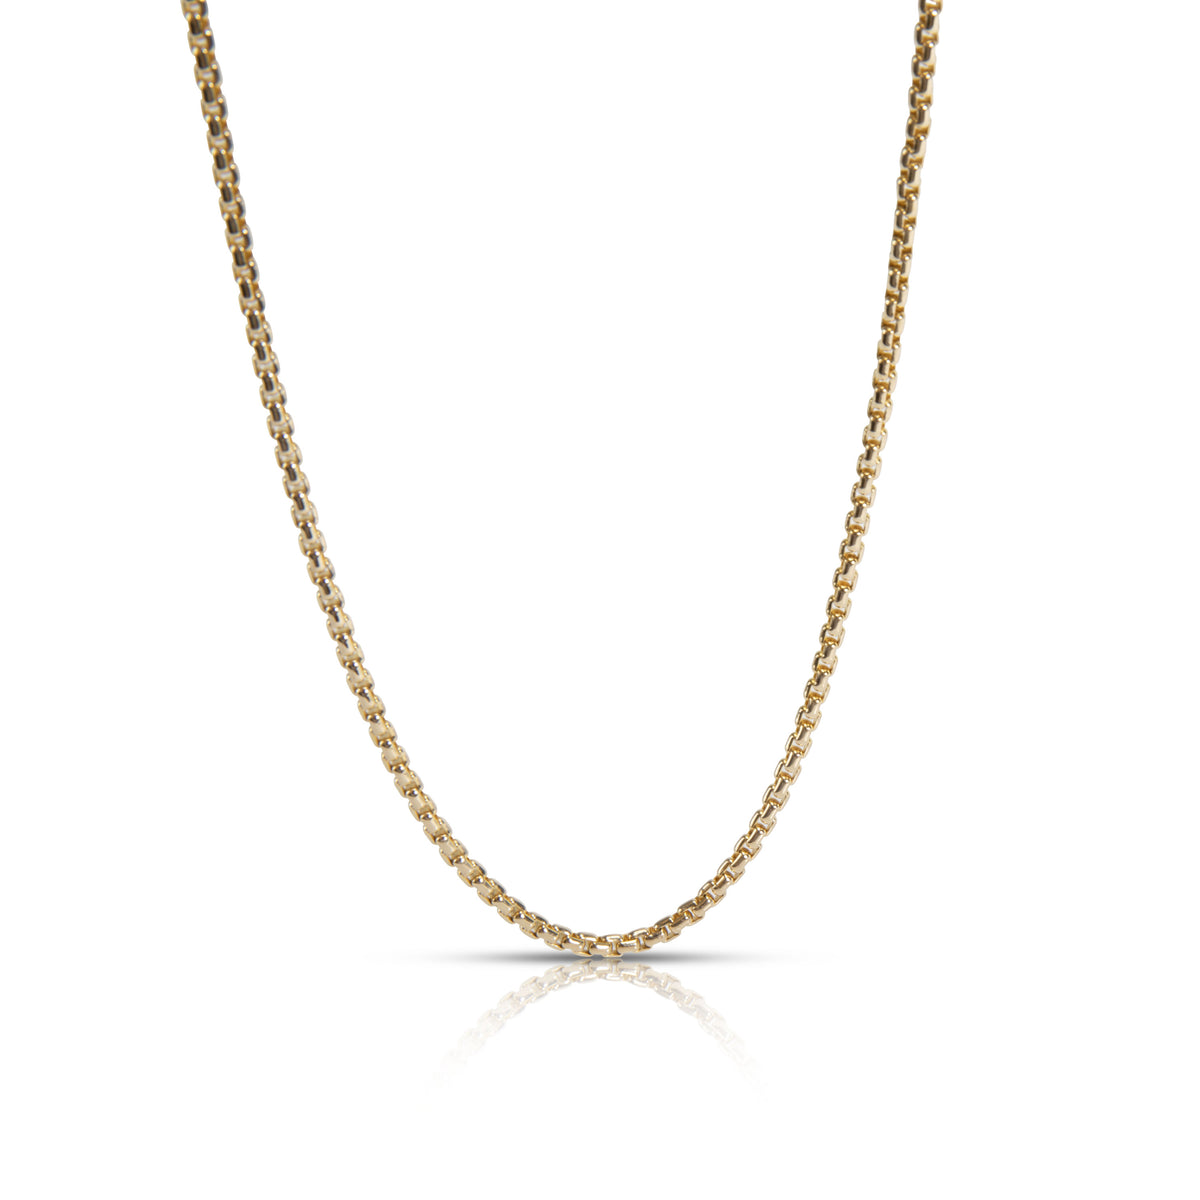 Box Chain in 14K Yellow Gold 2.3mm